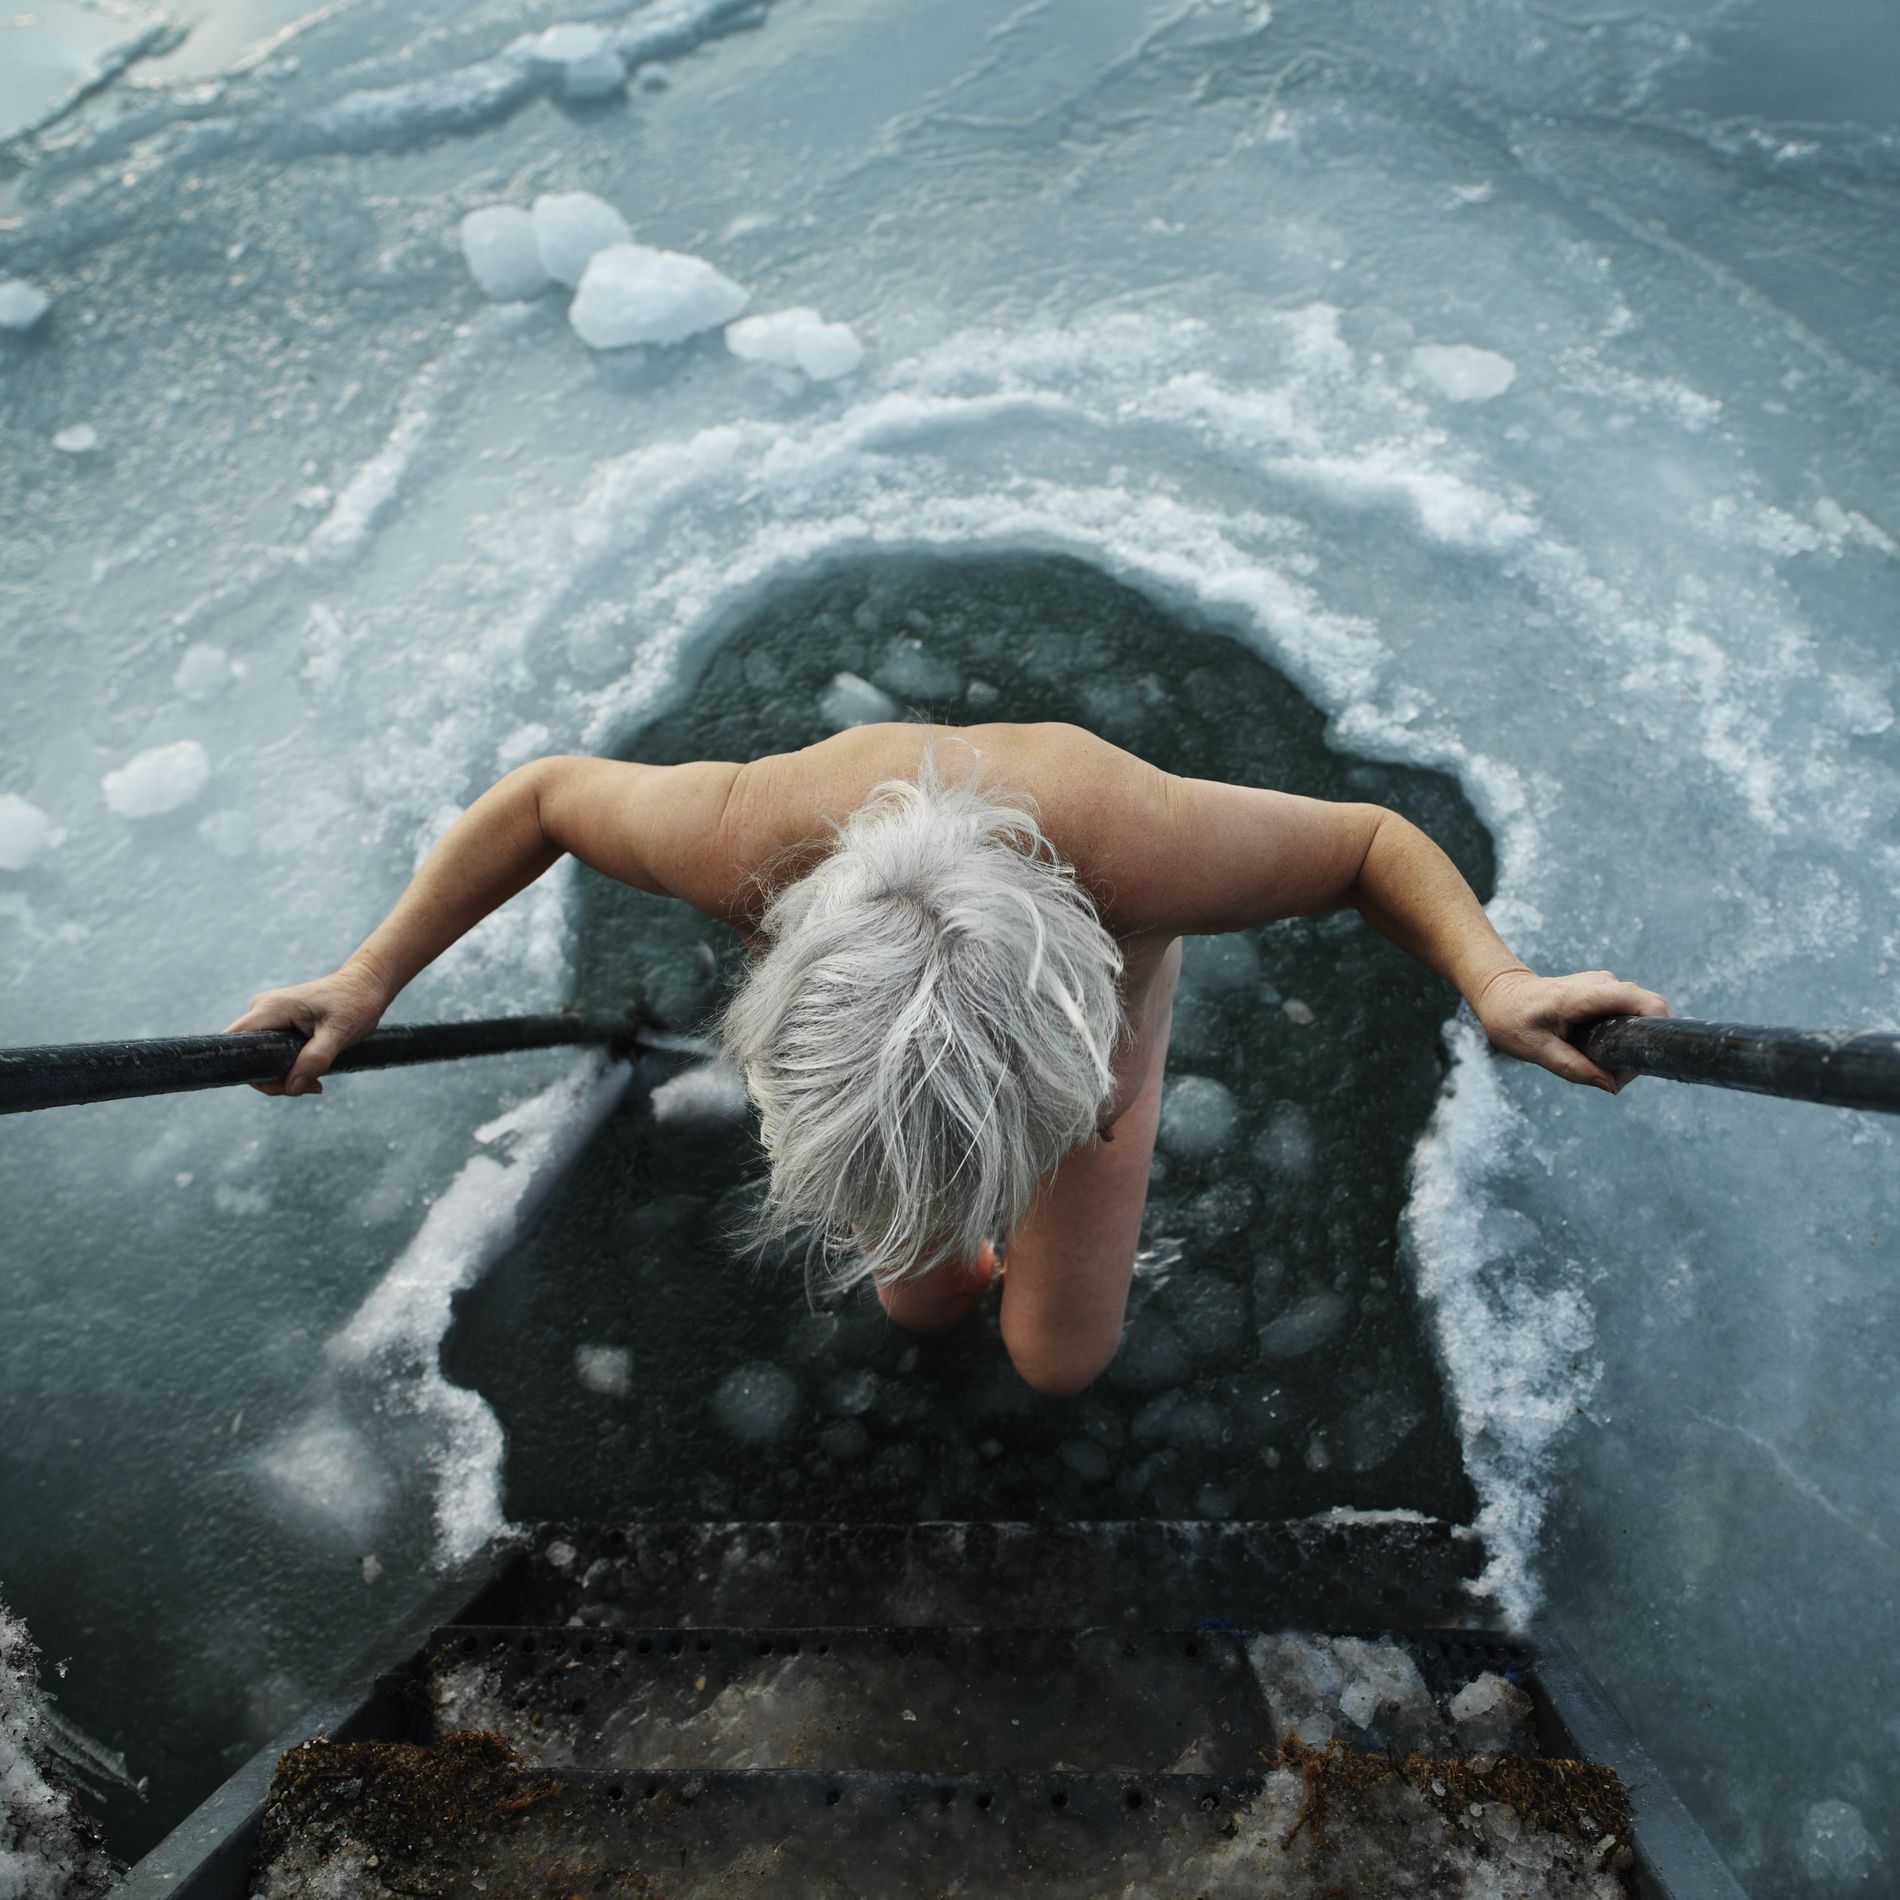 Woman hoisting herself out of icy water